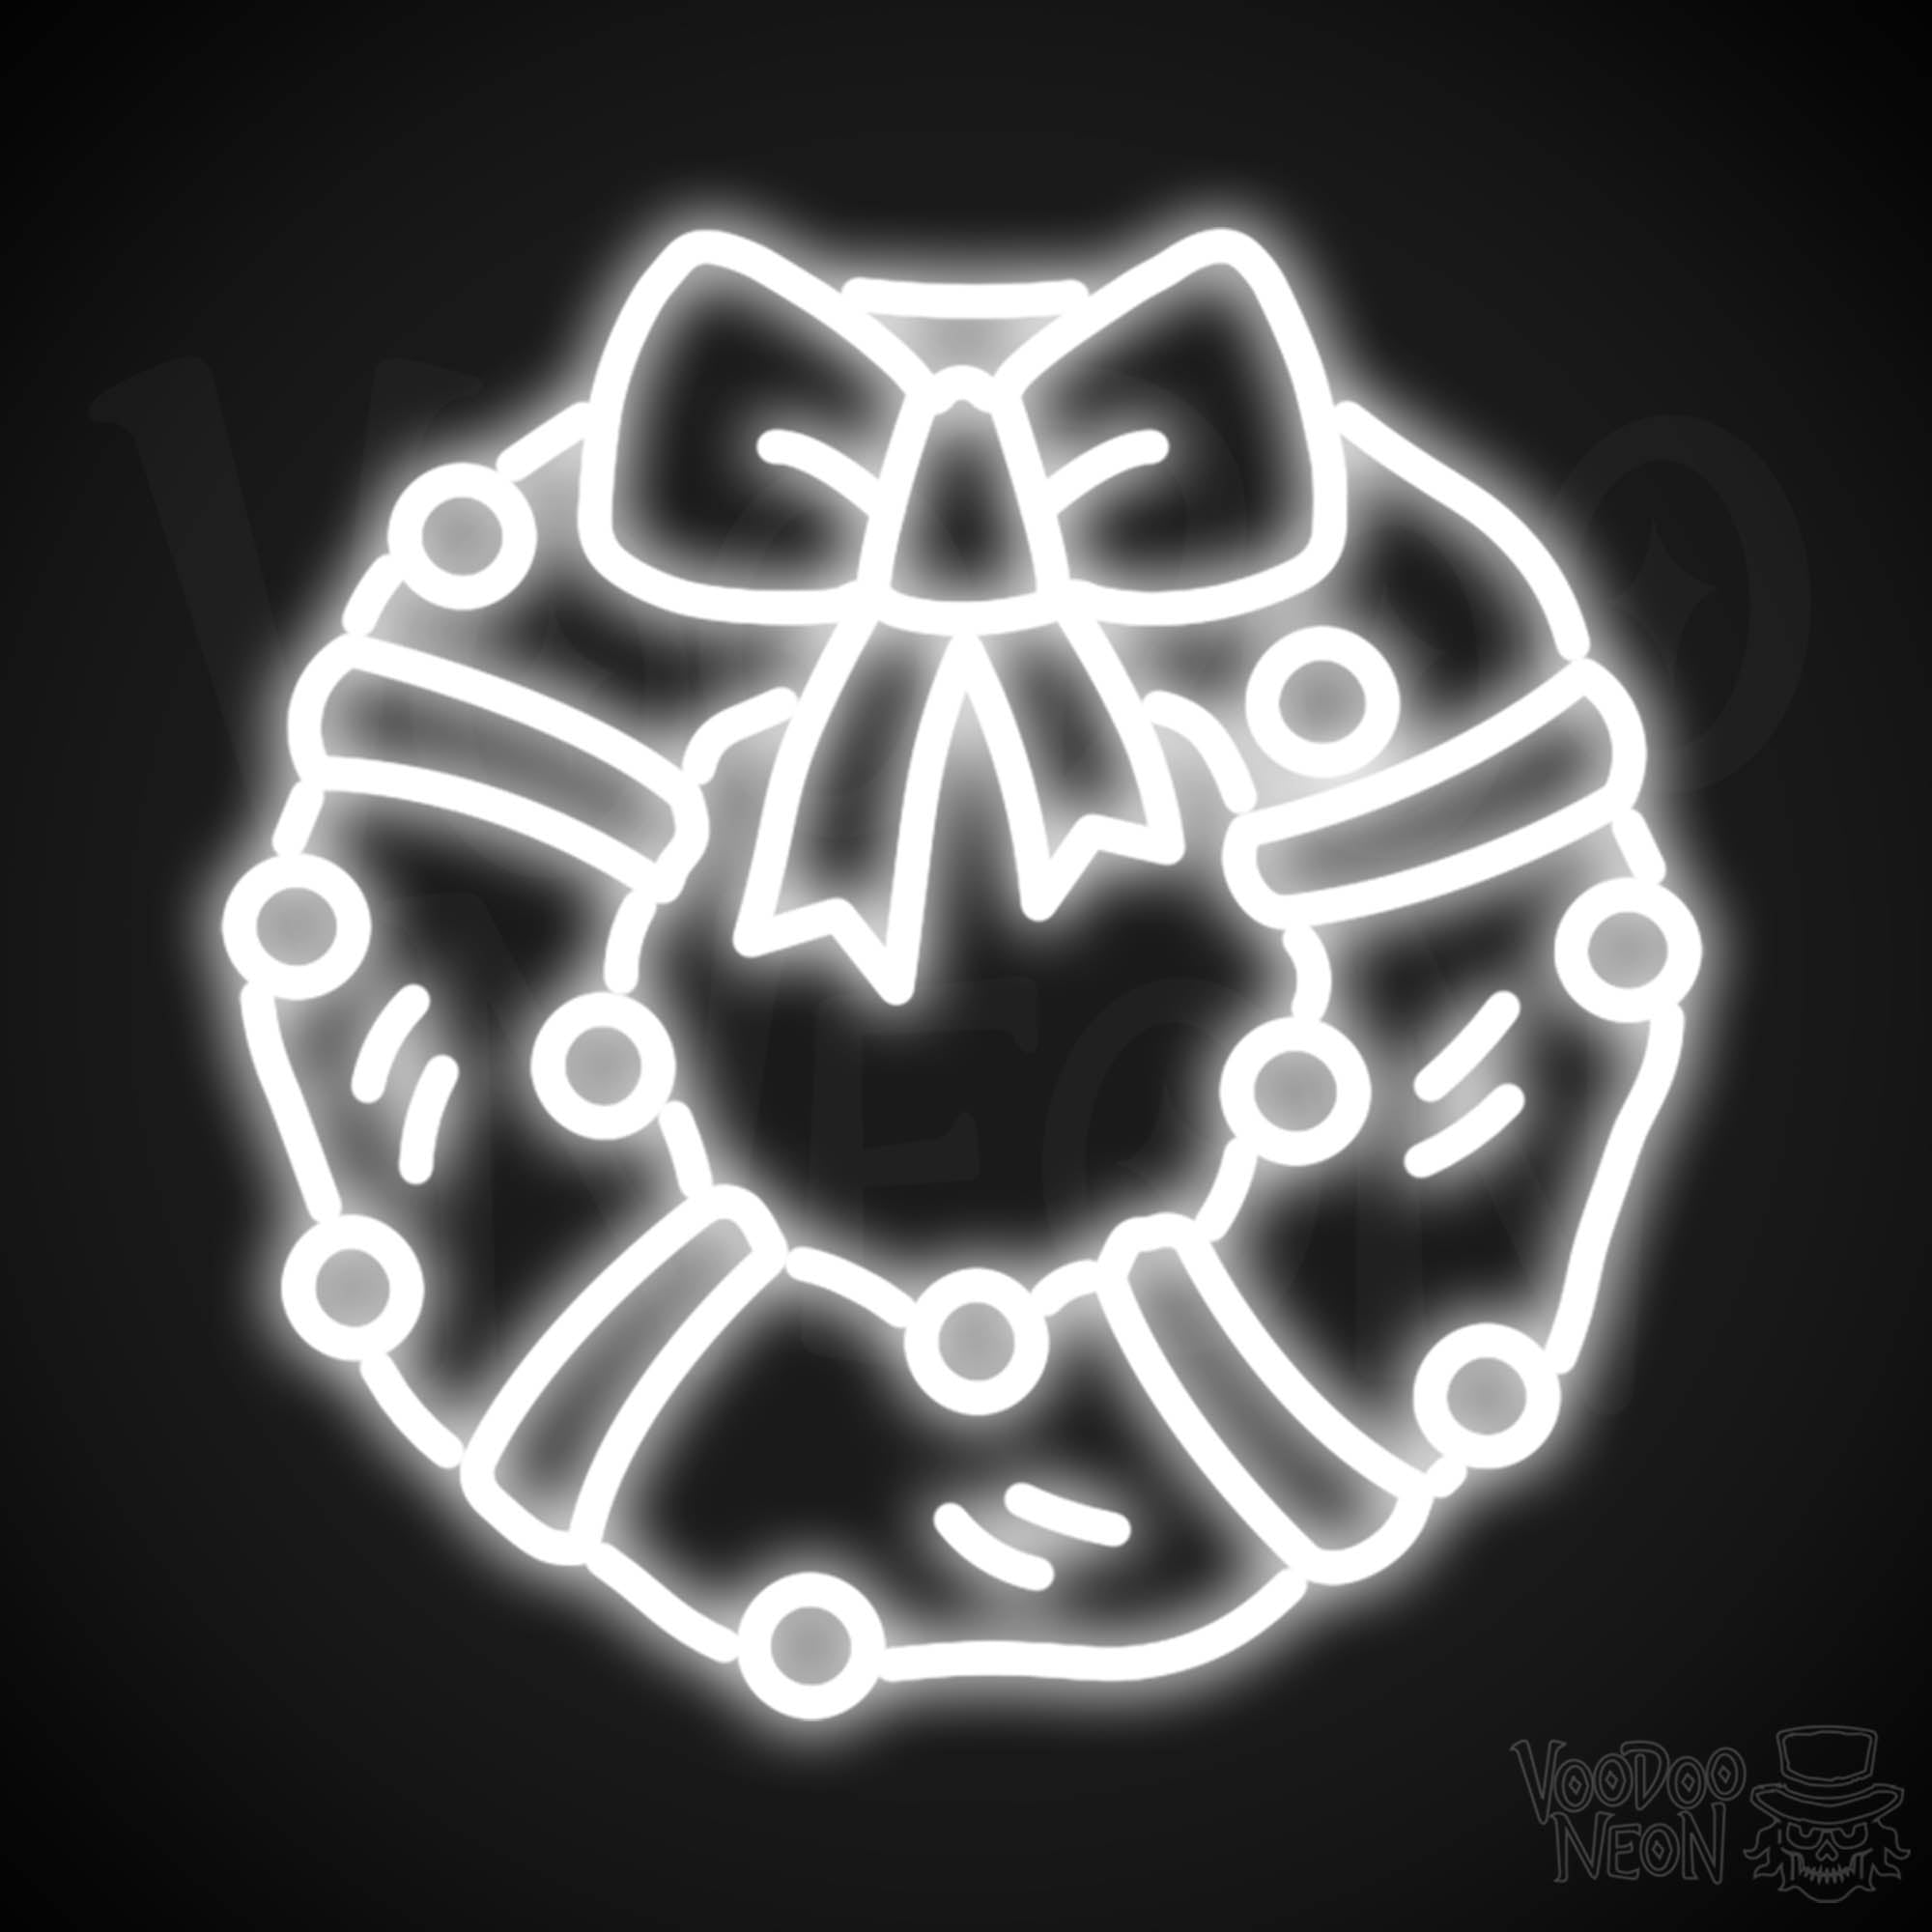 Logo for Neon White by duhnuhnuh_duhnuhnuh